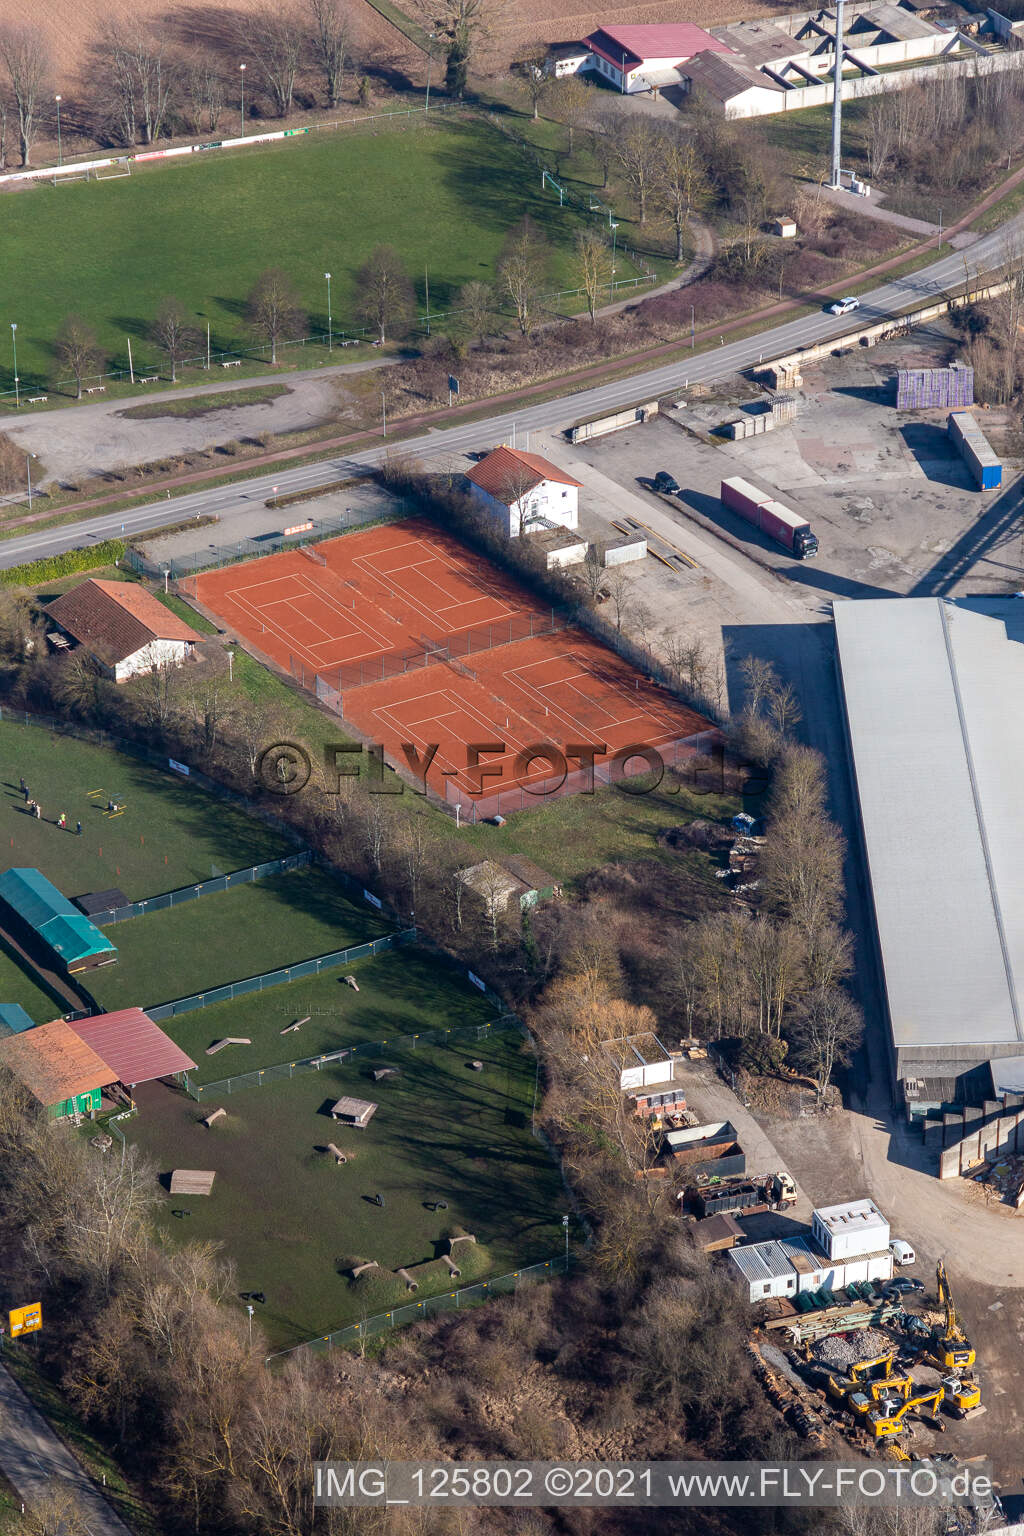 Aerial view of Tennis and dog sports club in Rohrbach in the state Rhineland-Palatinate, Germany